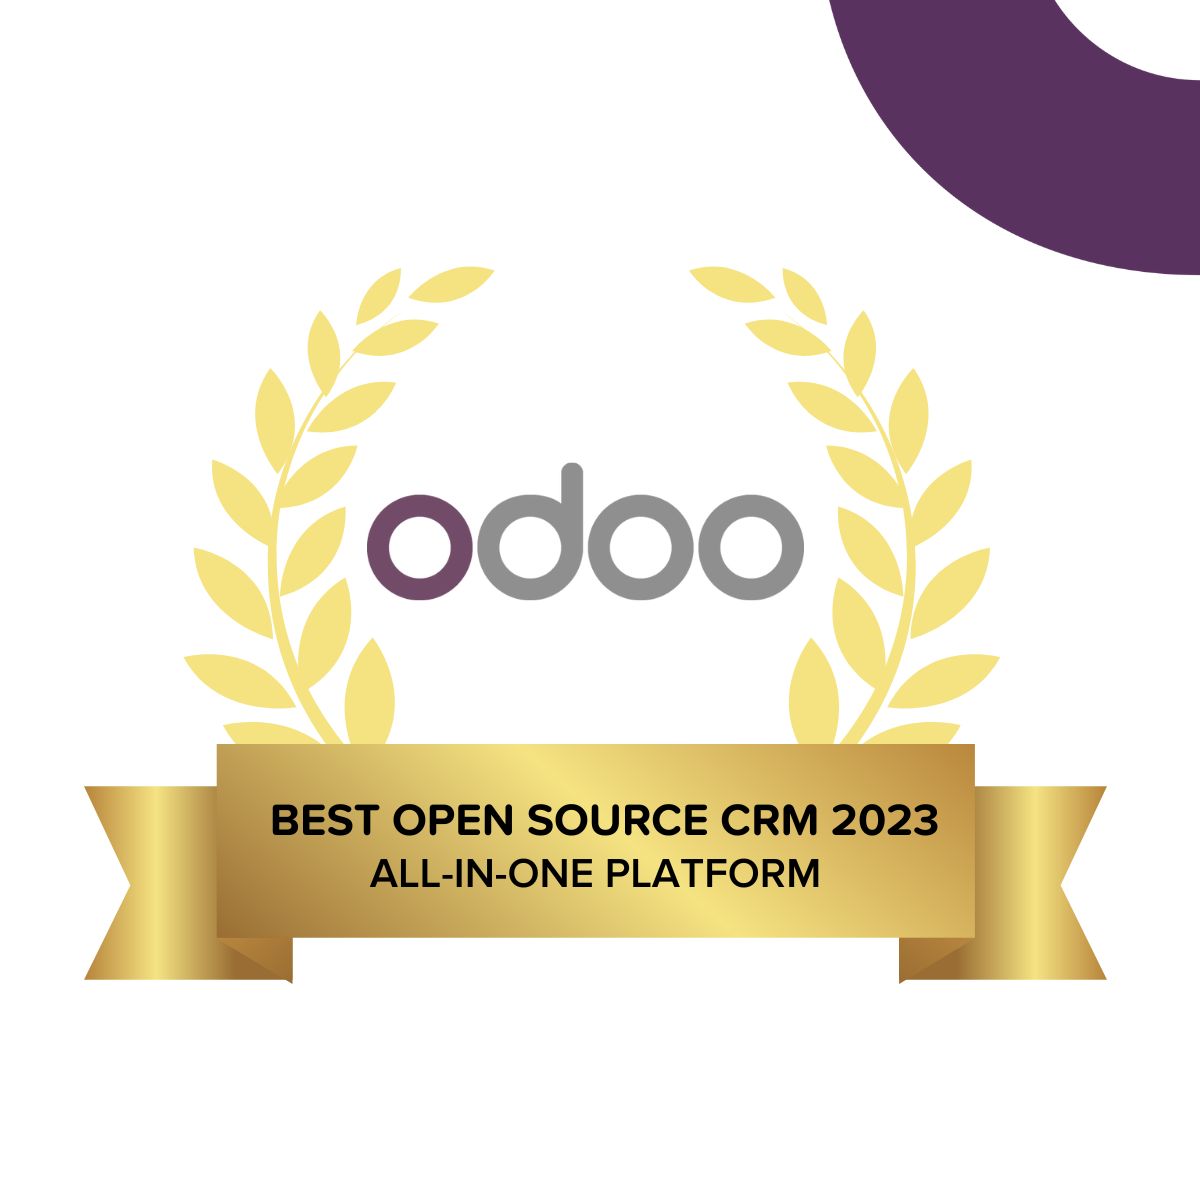 An award showing Odoo as the winner of best open source crm 2023